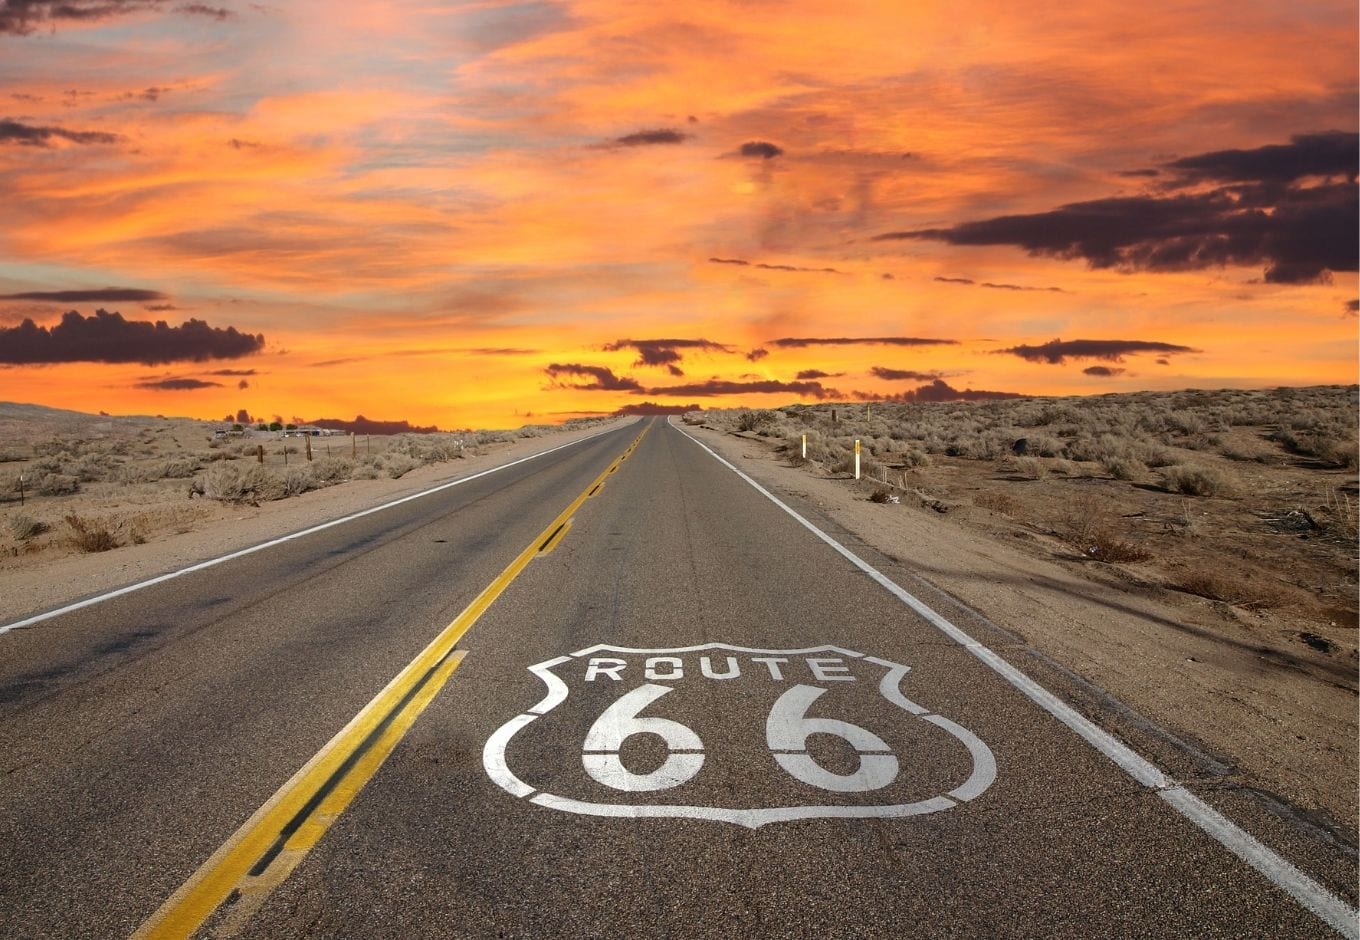 The route 66 during an orange sunset.